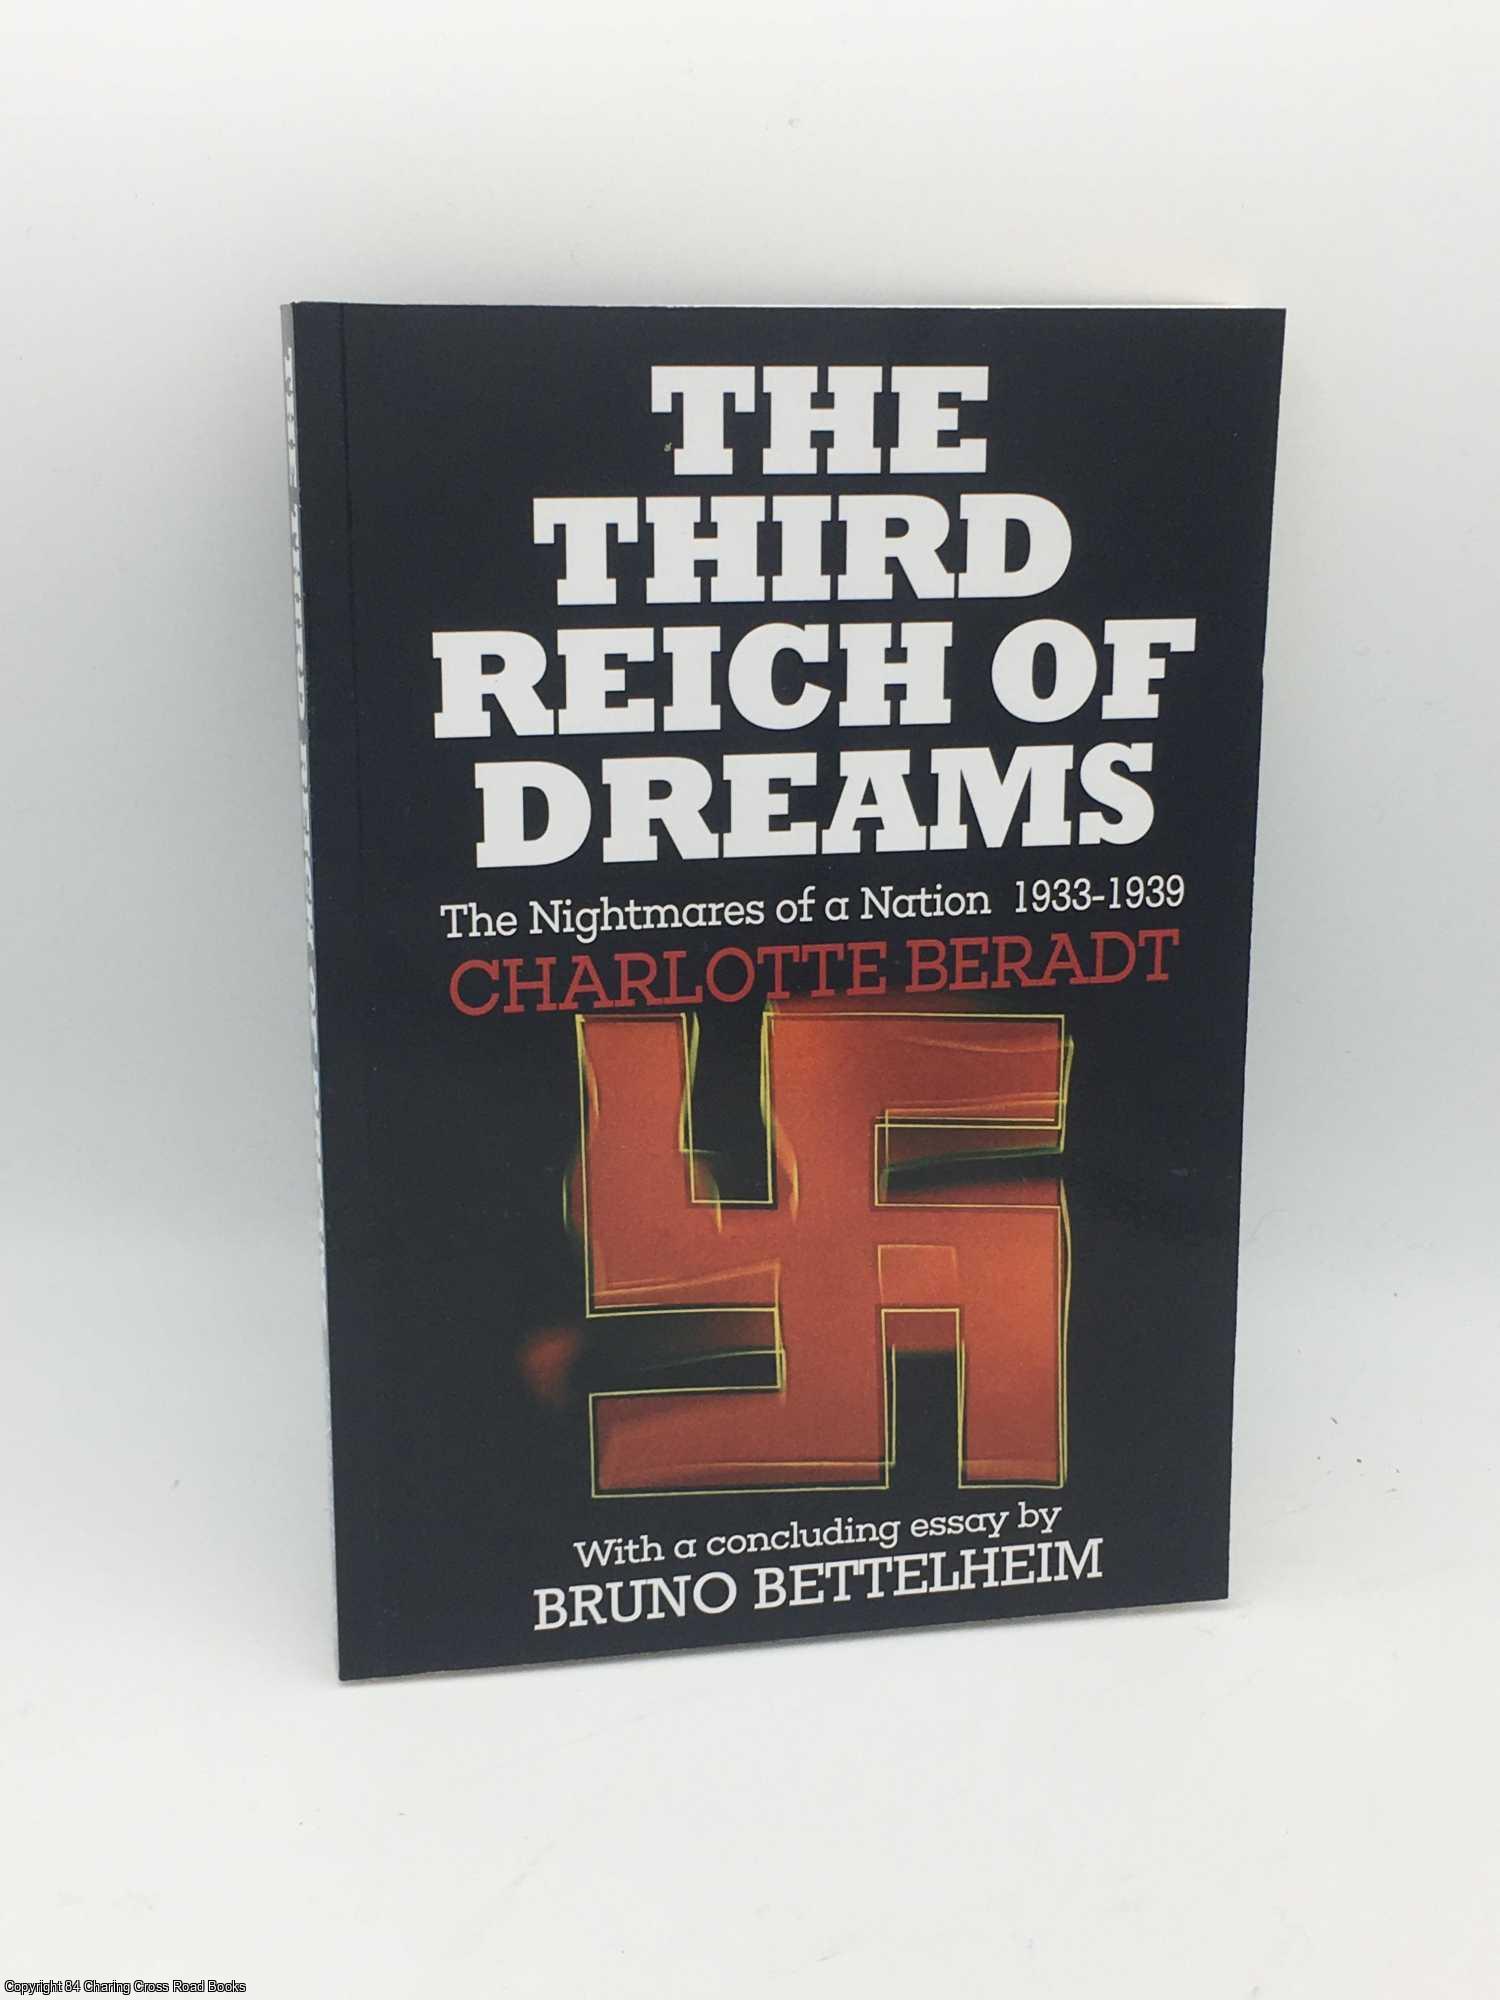 Beradt, Charlotte - The Third Reich of Dreams: The Nightmares of a Nation, 1933-39